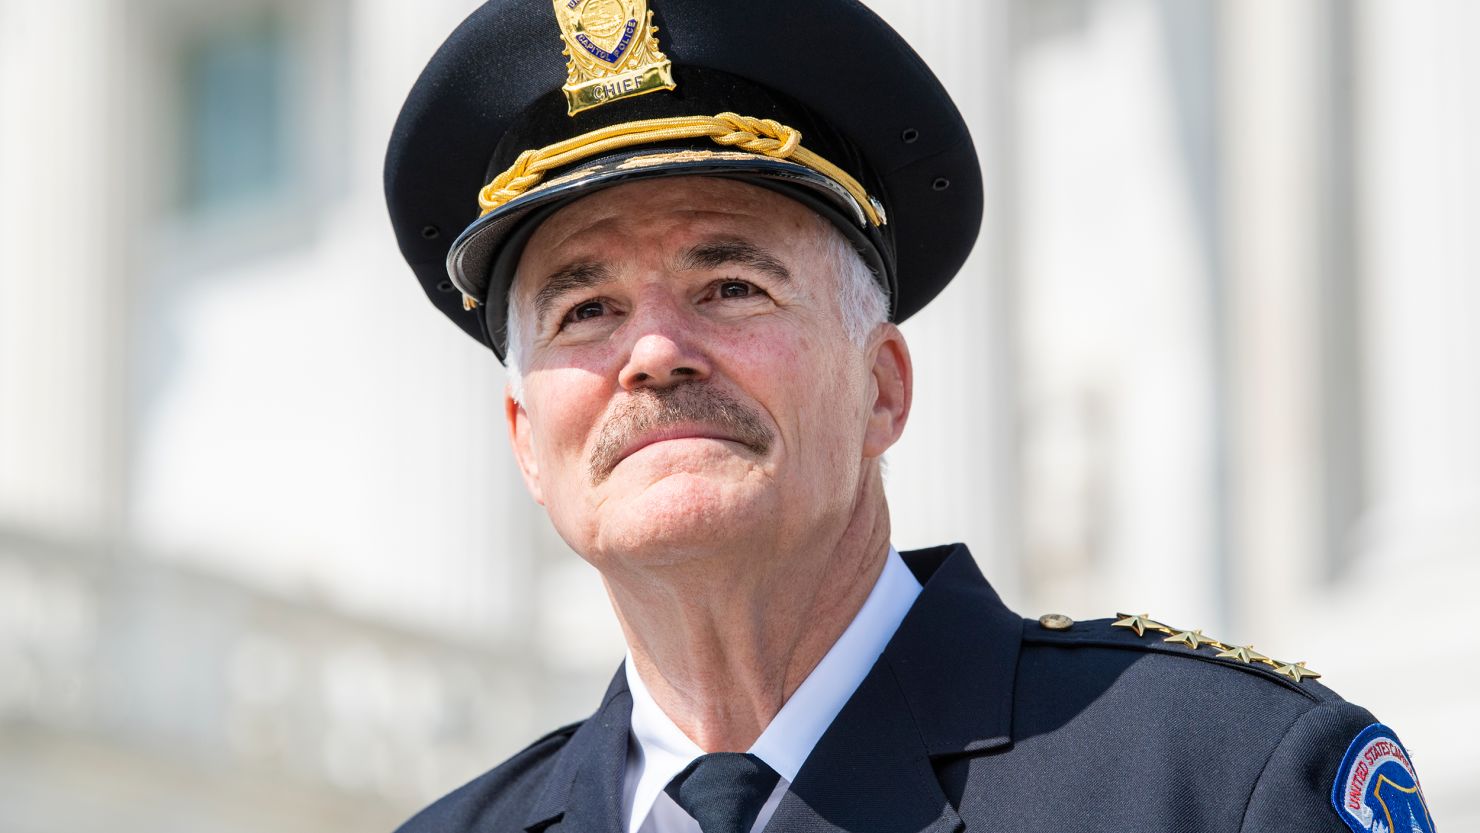 Tom Manger, the new chief of the US Capitol Police, is seen during his swearing-in ceremony at the Senate steps of the Capitol on Friday, July 23, 2021.